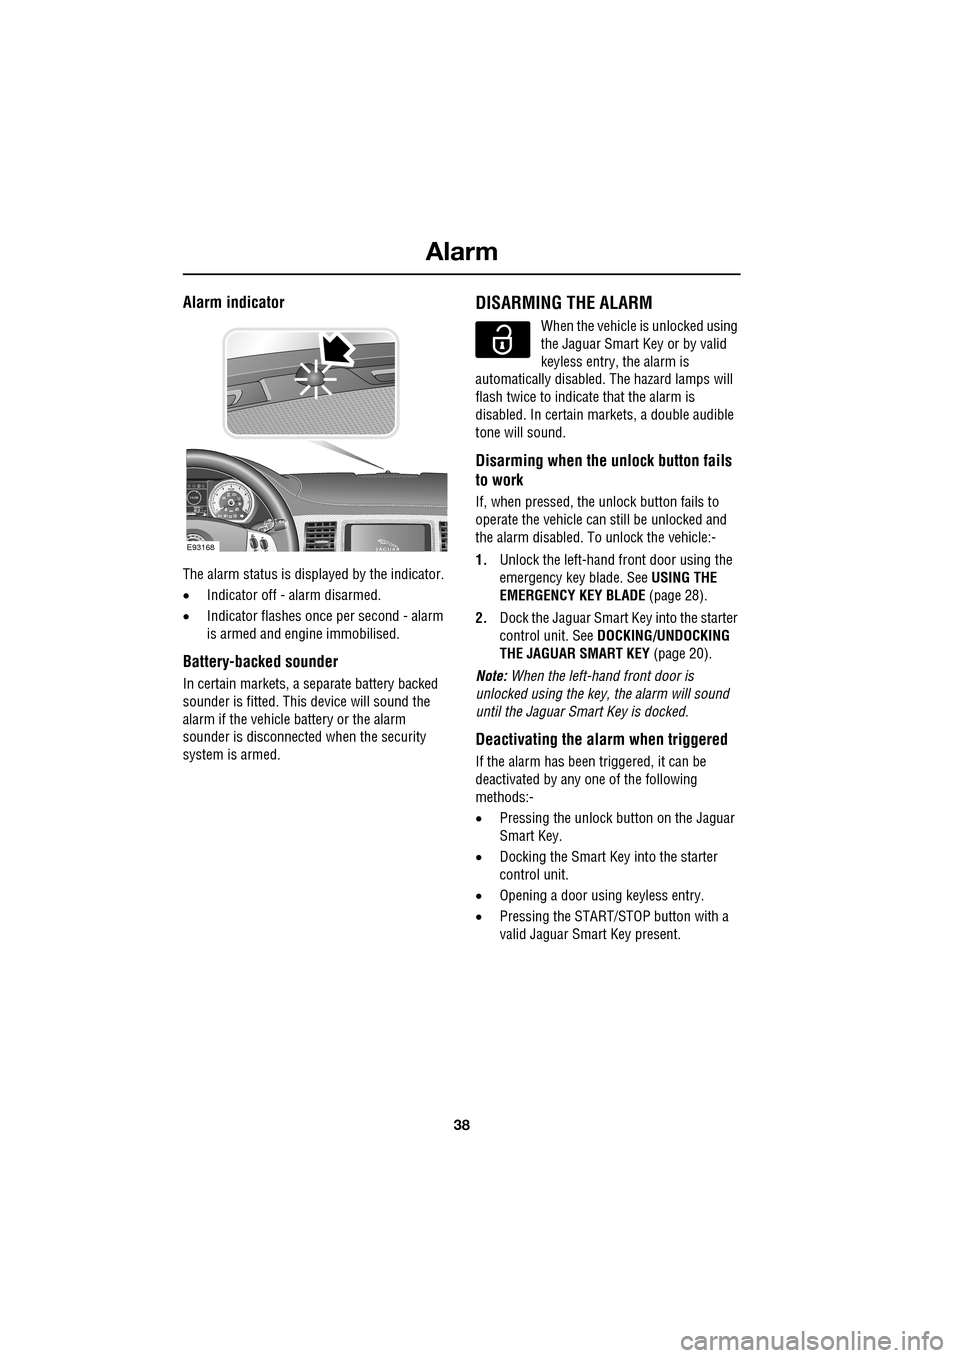 JAGUAR XF 2009 1.G Owners Manual Alarm
38
               
Alarm indicator
The alarm status is displayed by the indicator. 
•Indicator off - alarm disarmed.
• Indicator flashes onc e per second - alarm 
is armed and engine immobil